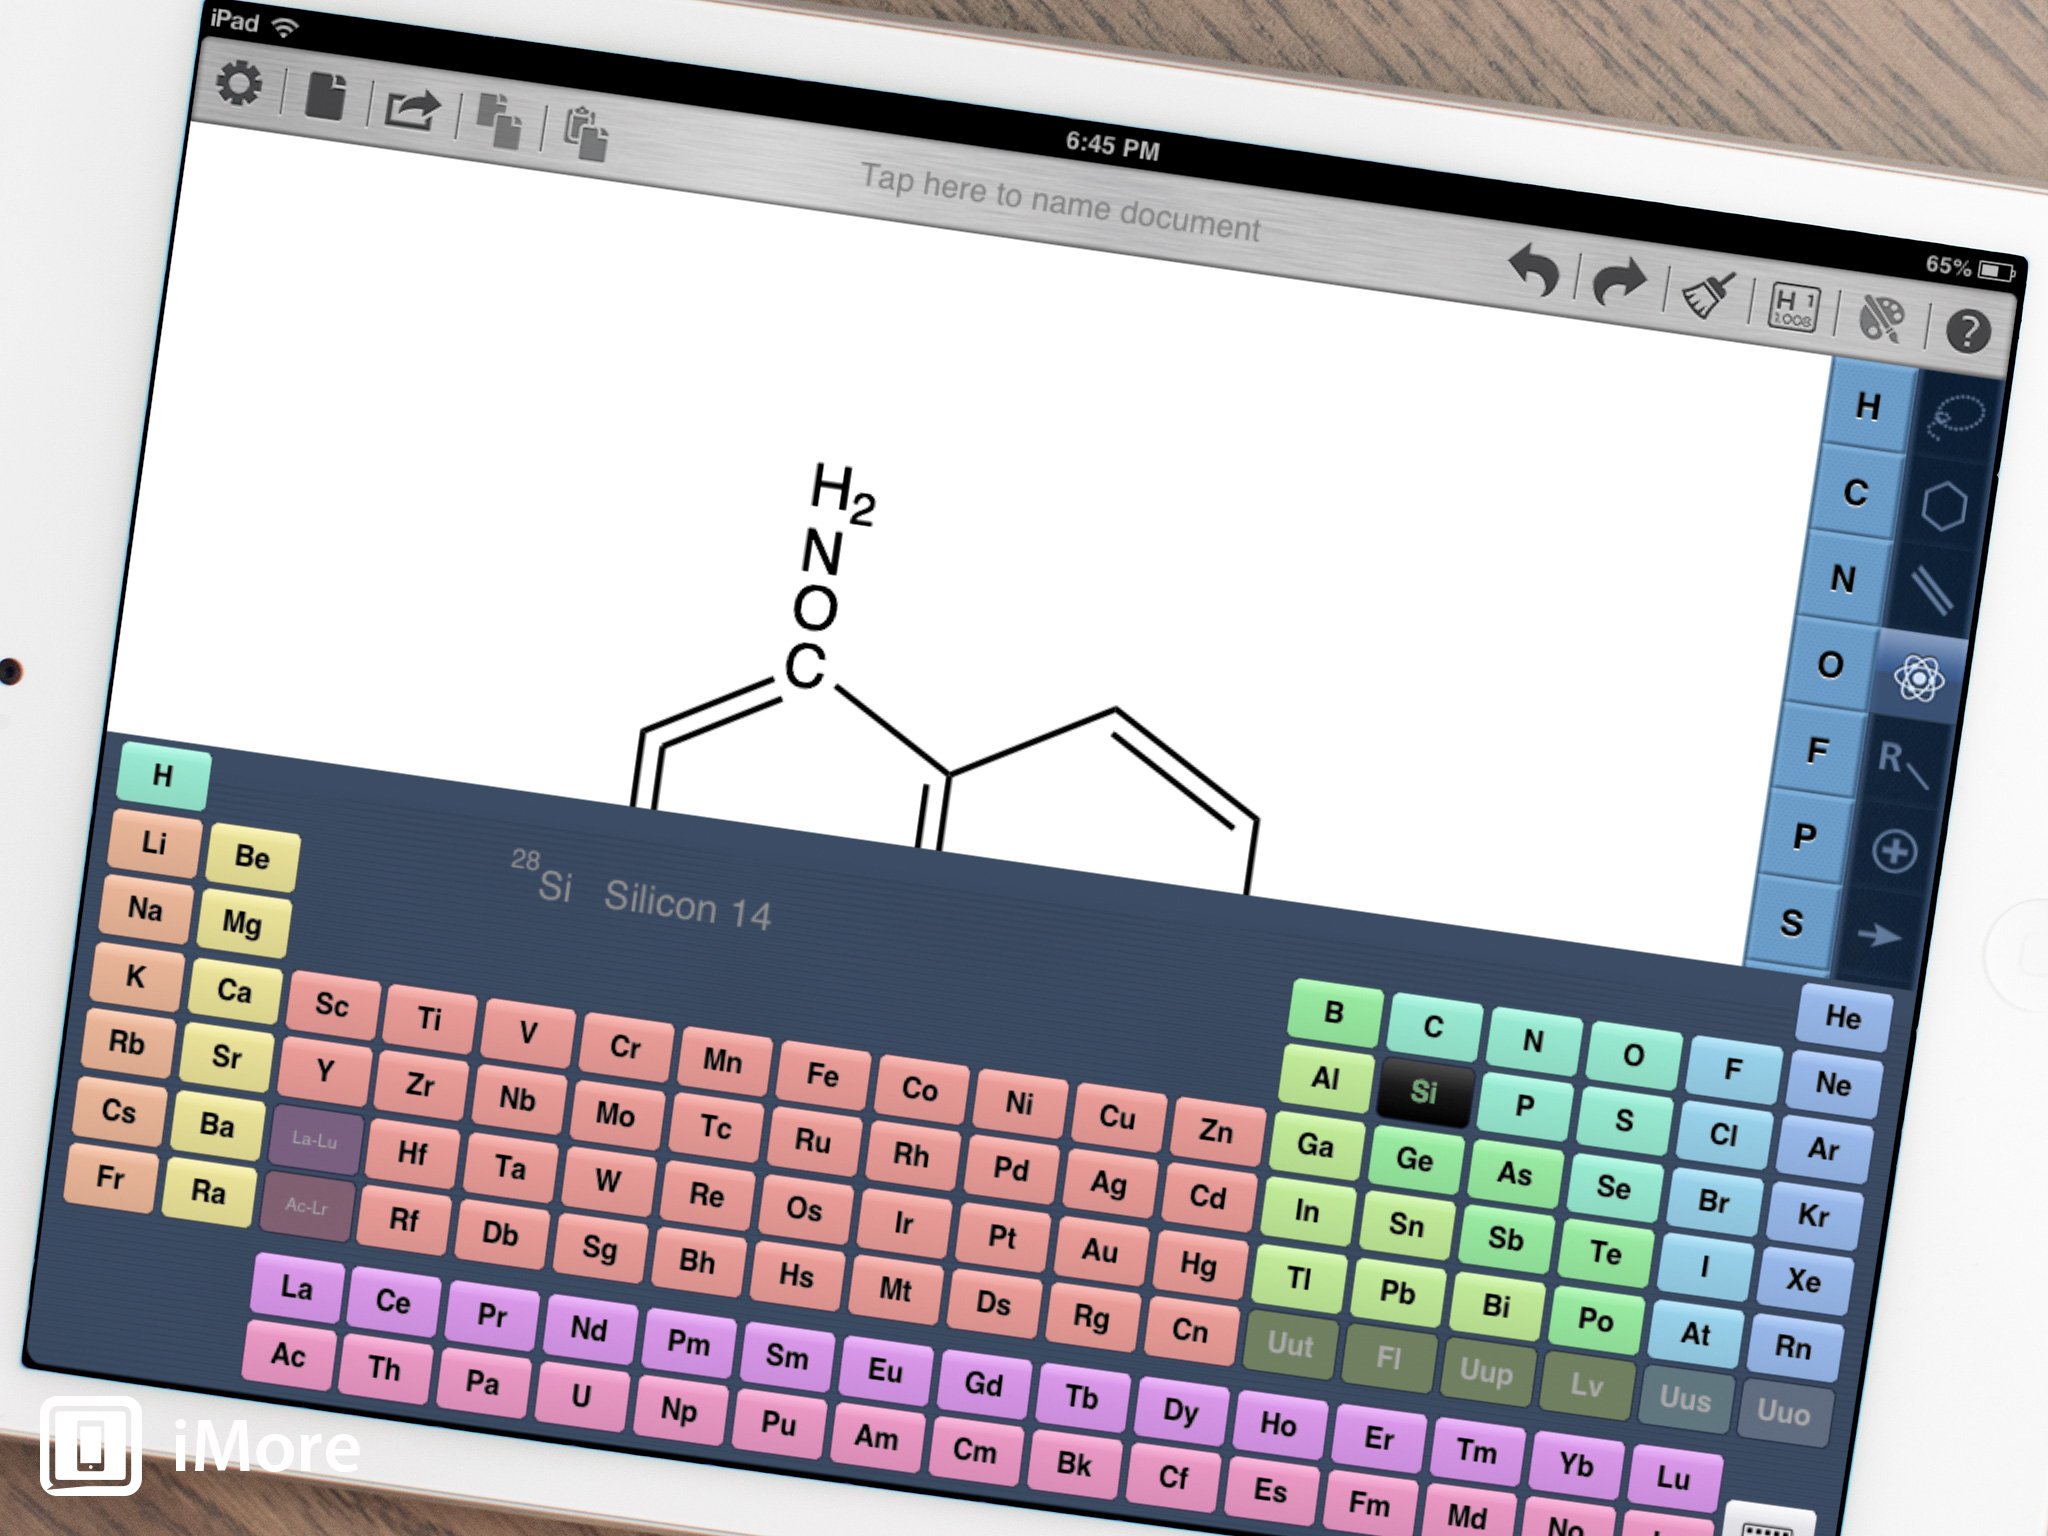 ChemDraw for iPad review: Molecular structure creation, sharing, error checking, and more!